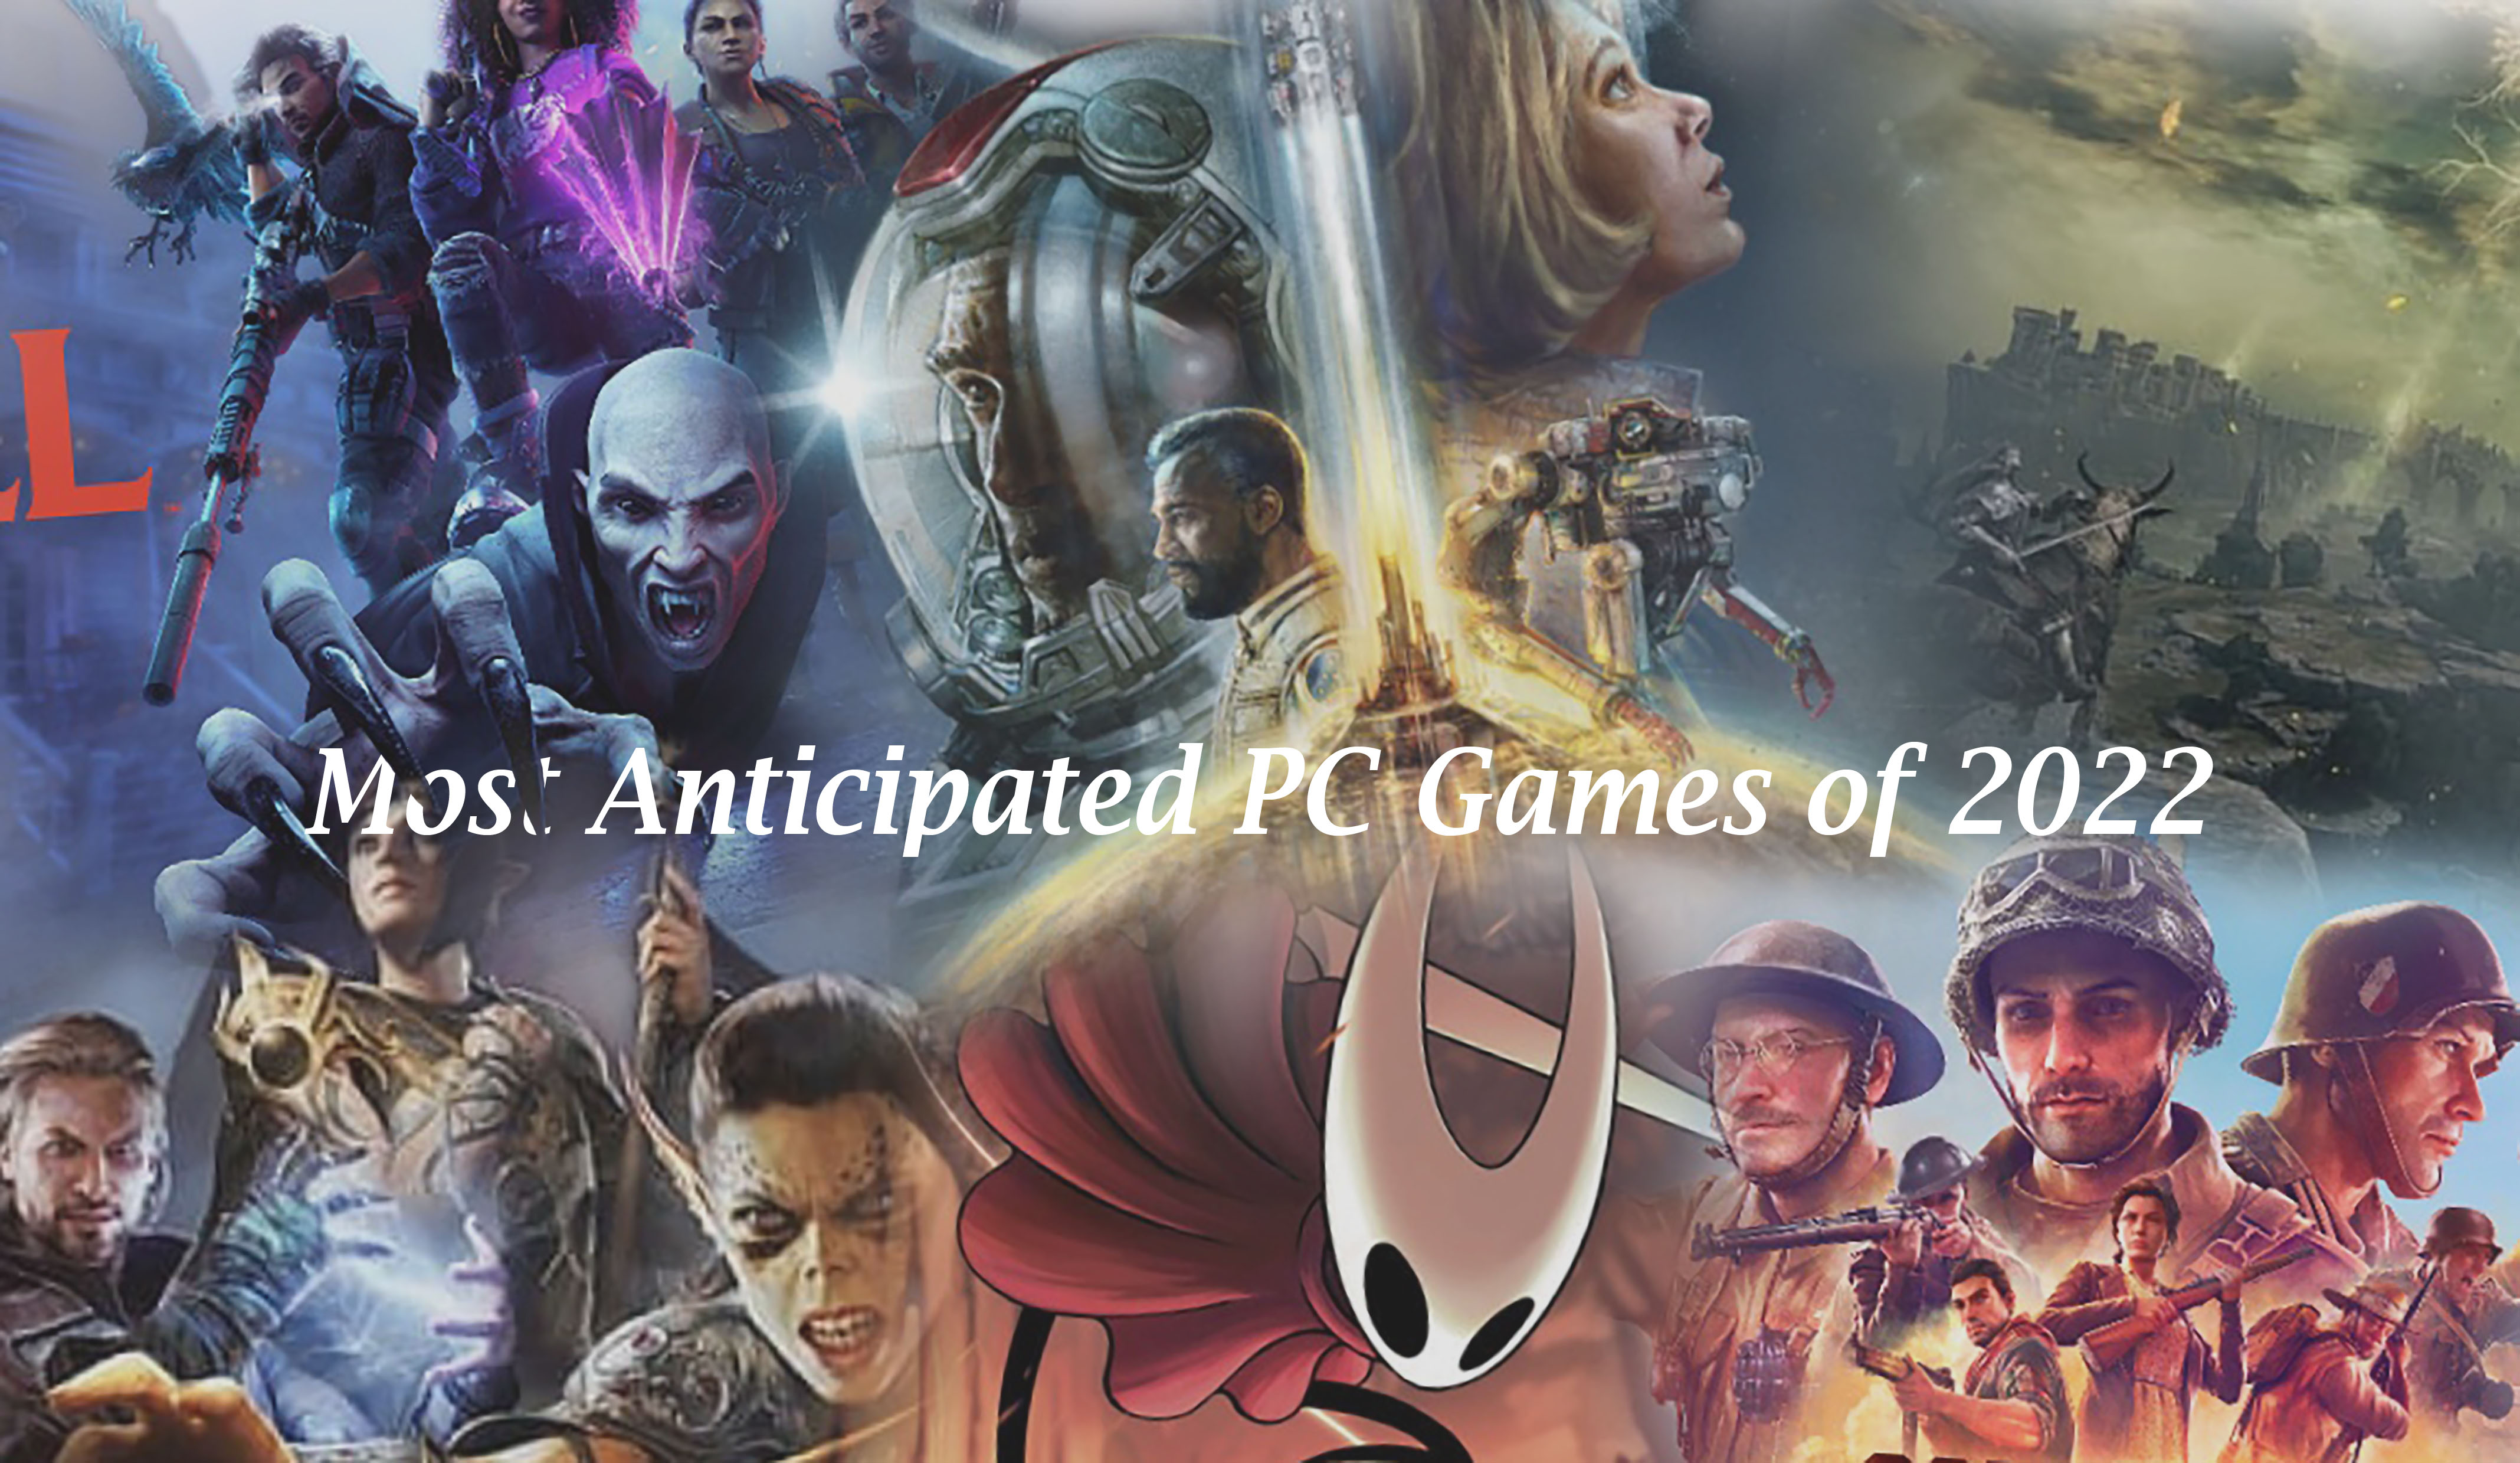 The 22 most anticipated PC games of 2022